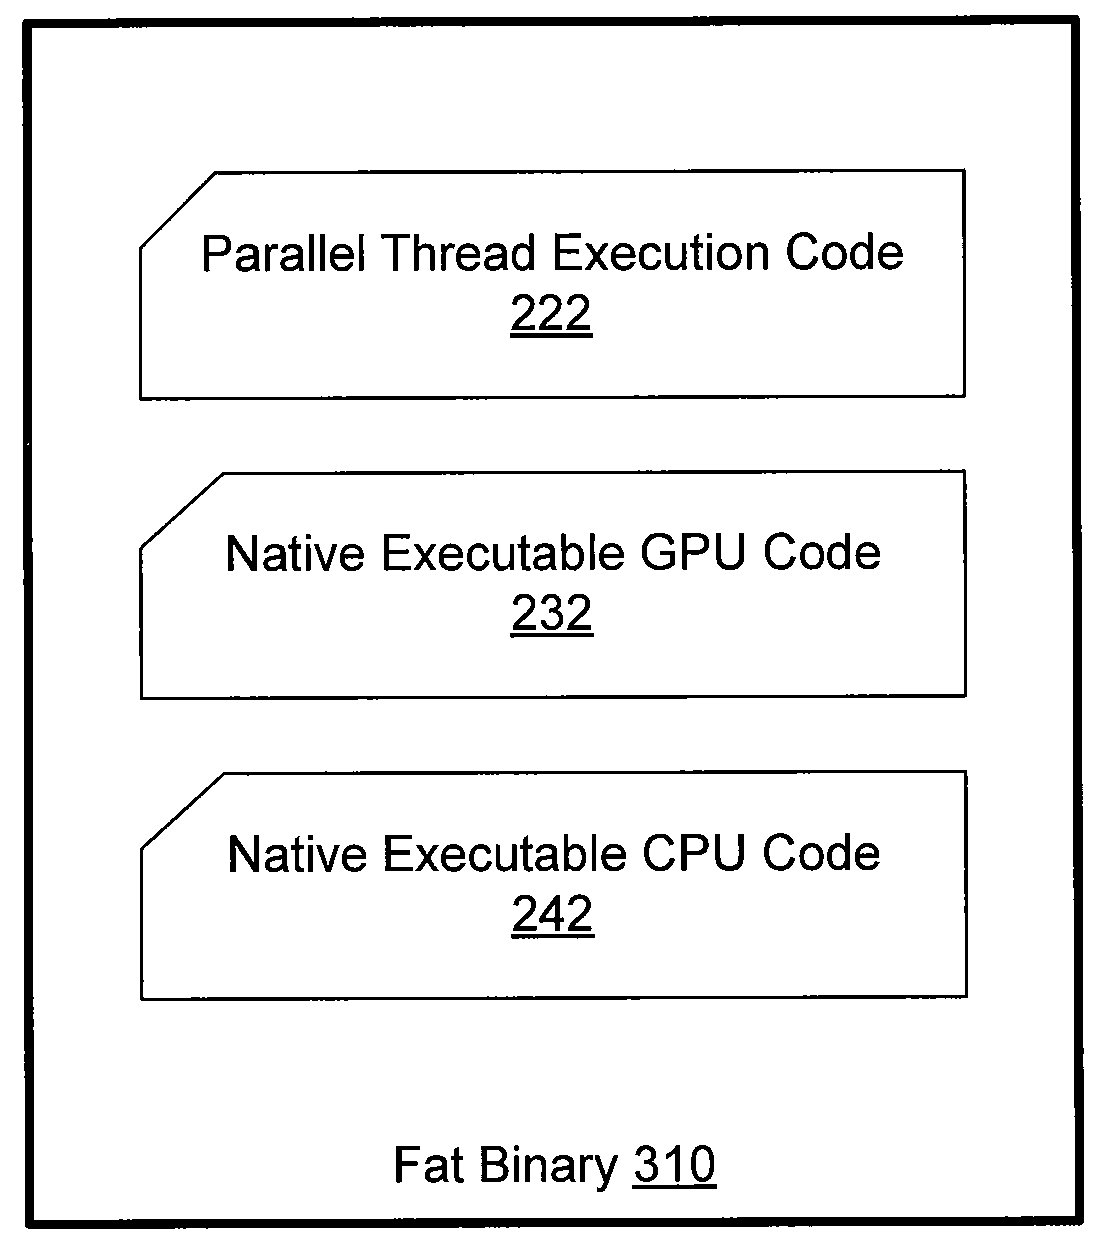 Method for compiling a parallel thread execution program for general execution